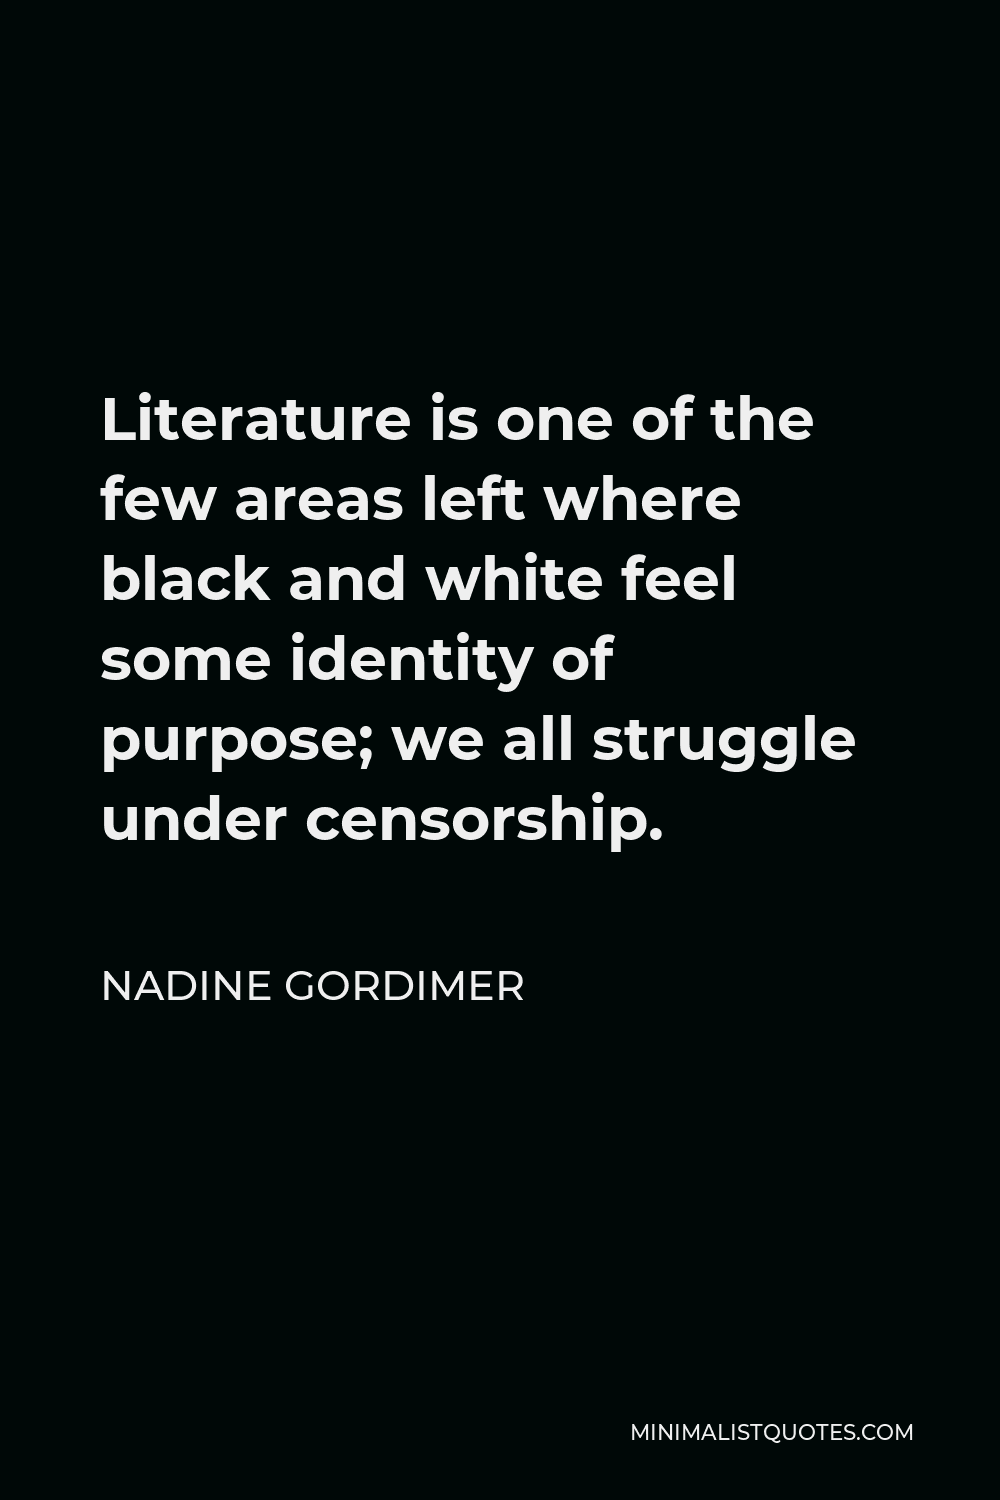 Nadine Gordimer Quote - Literature is one of the few areas left where black and white feel some identity of purpose; we all struggle under censorship.